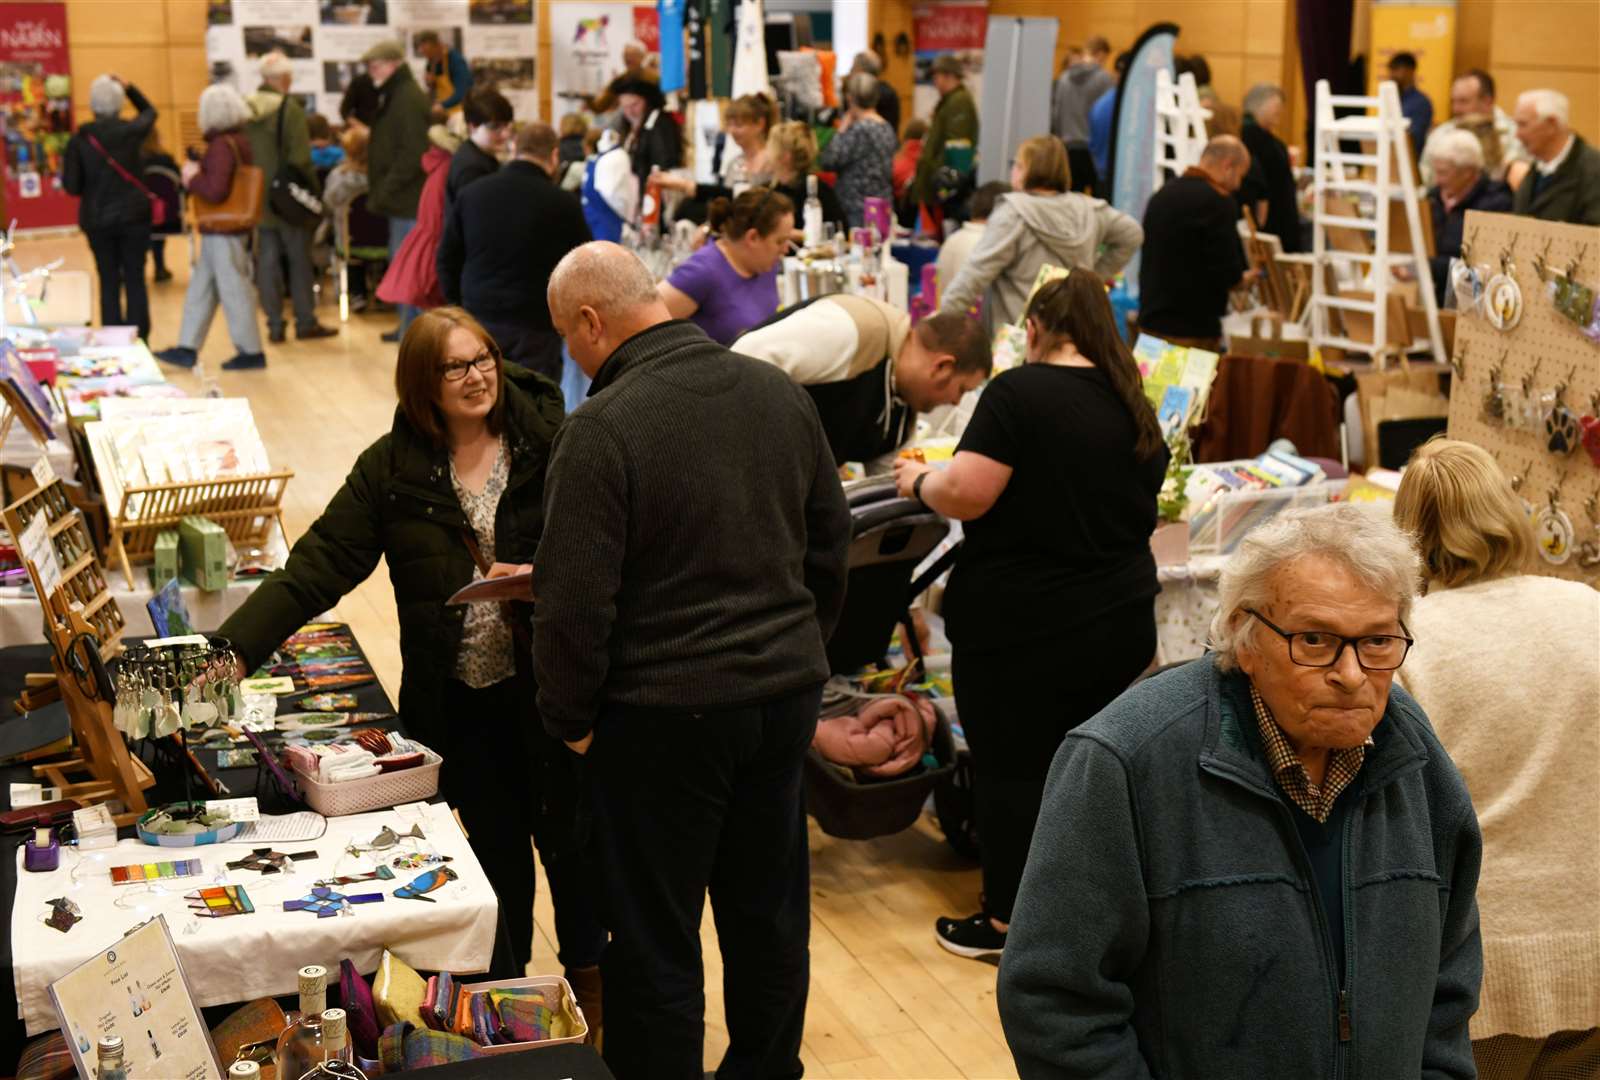 The indoor market was a big hit at this year's Taste of Nairn festival. Picture: James Mackenzie